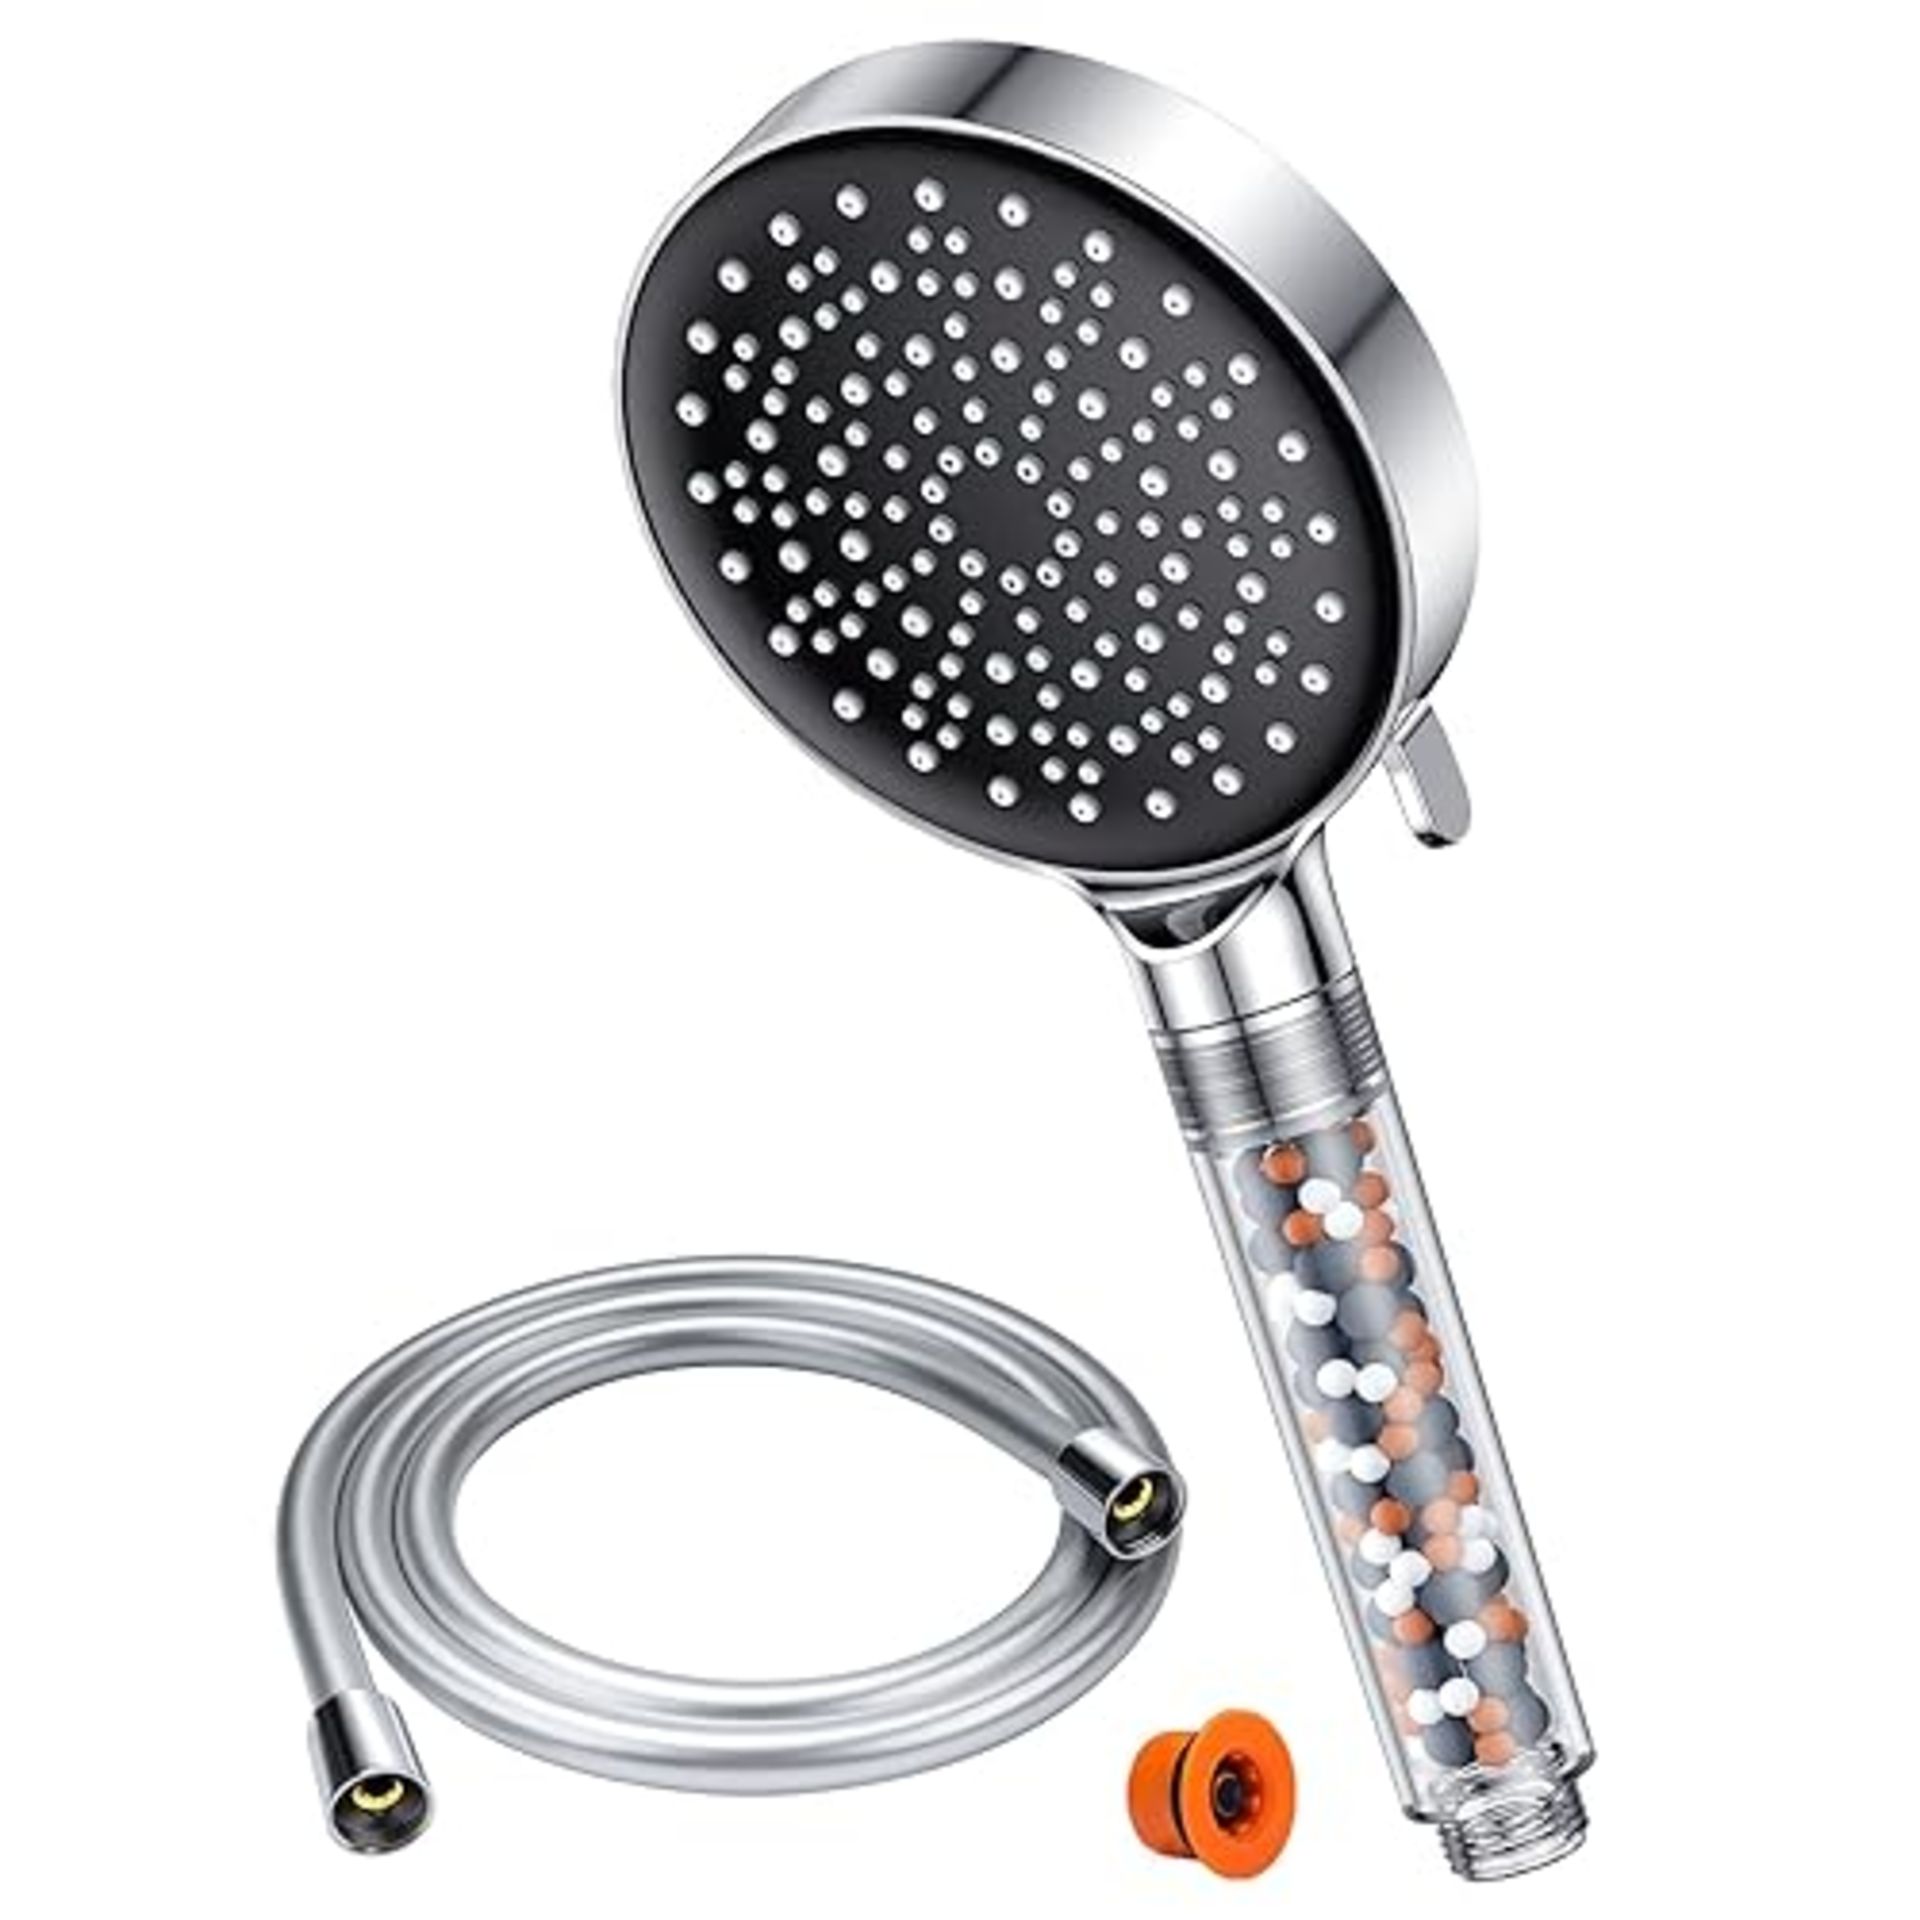 Shower Head and Hose 1.6M, YEAUPE High-Pressure Shower Head with 5 Spray Modes, Shower Head Filter 